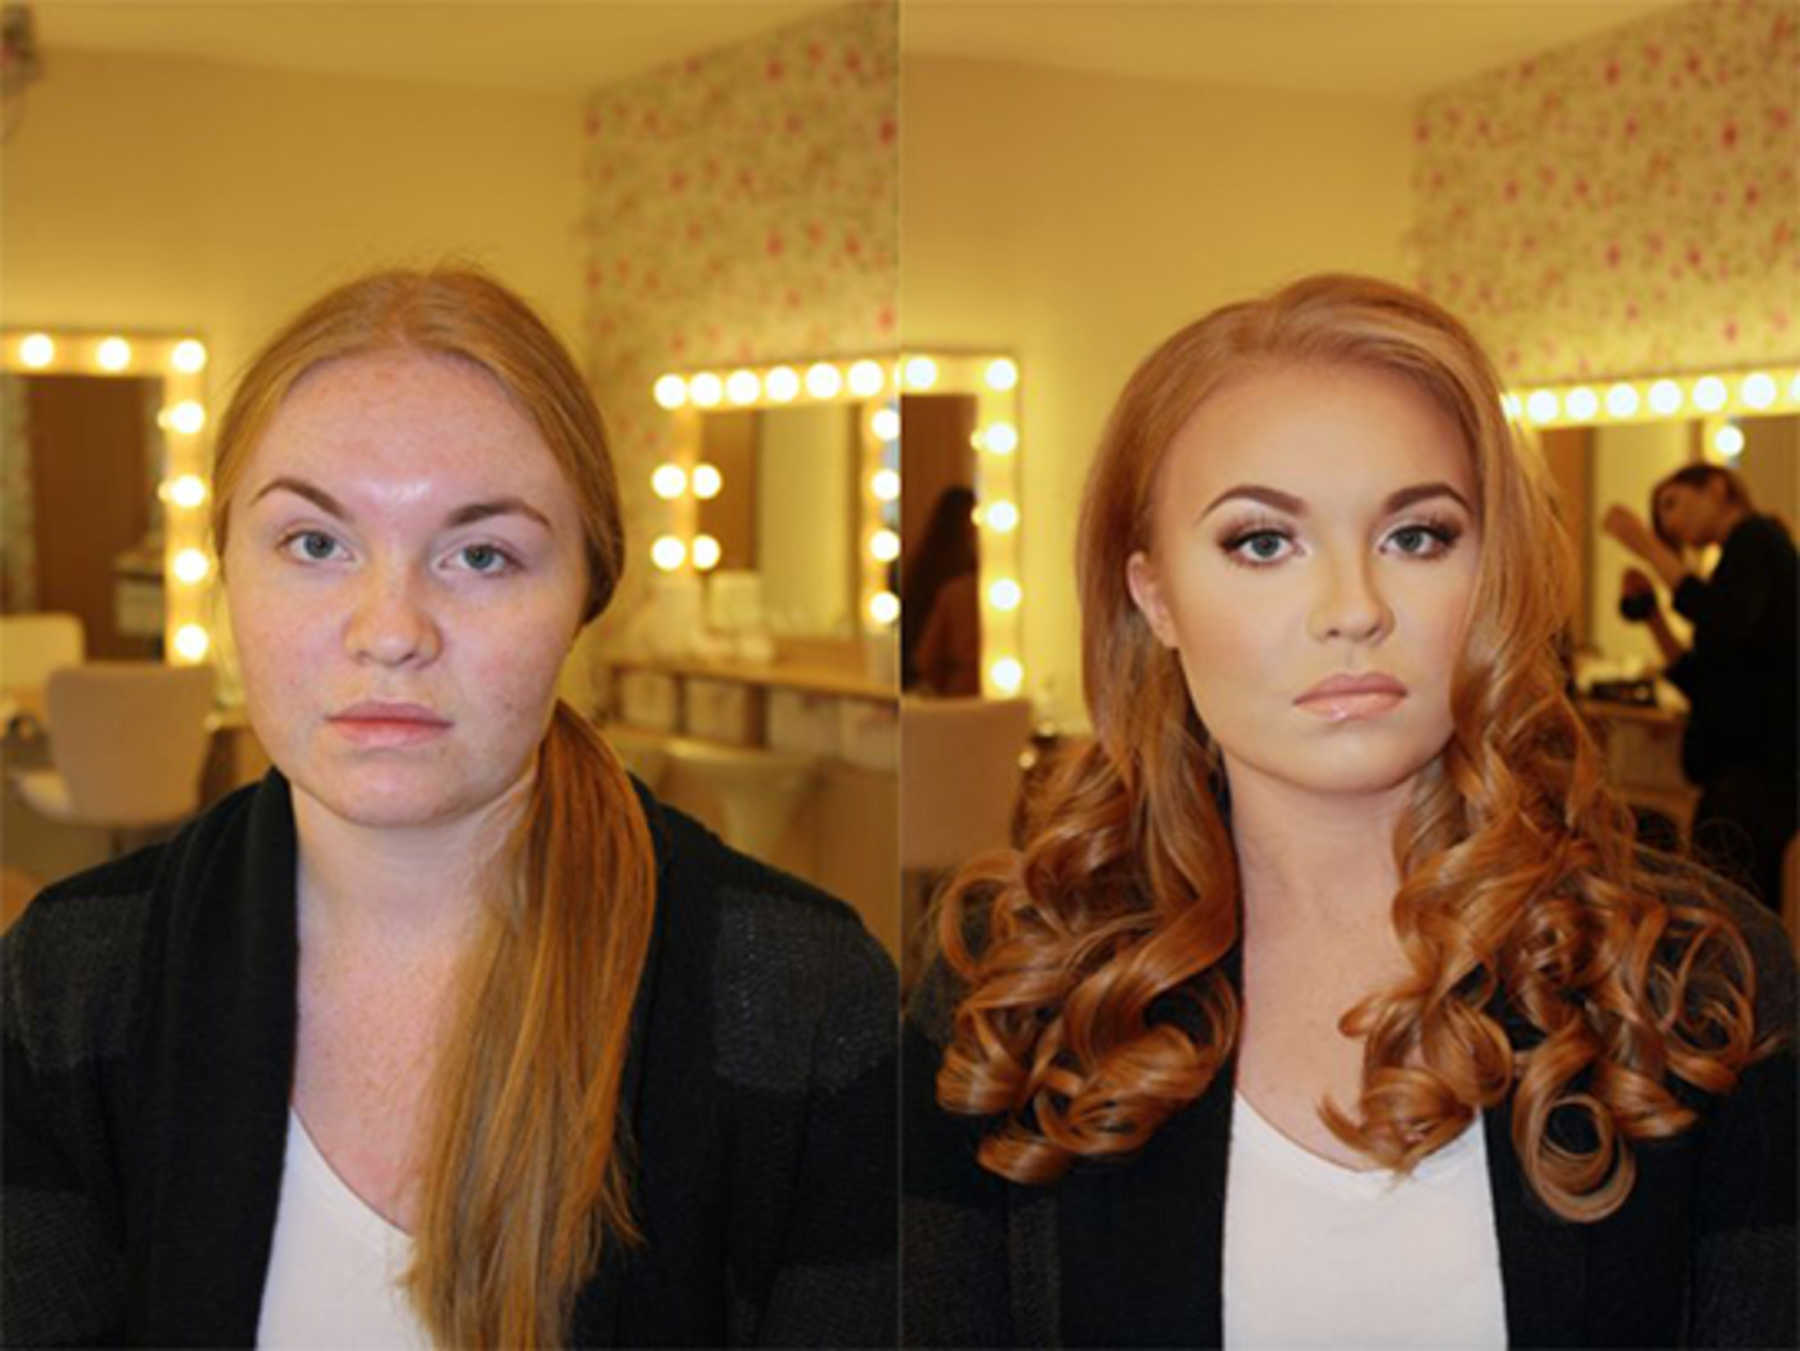 Amazing 'Before' 'After' Pictures Makeup Mom.com